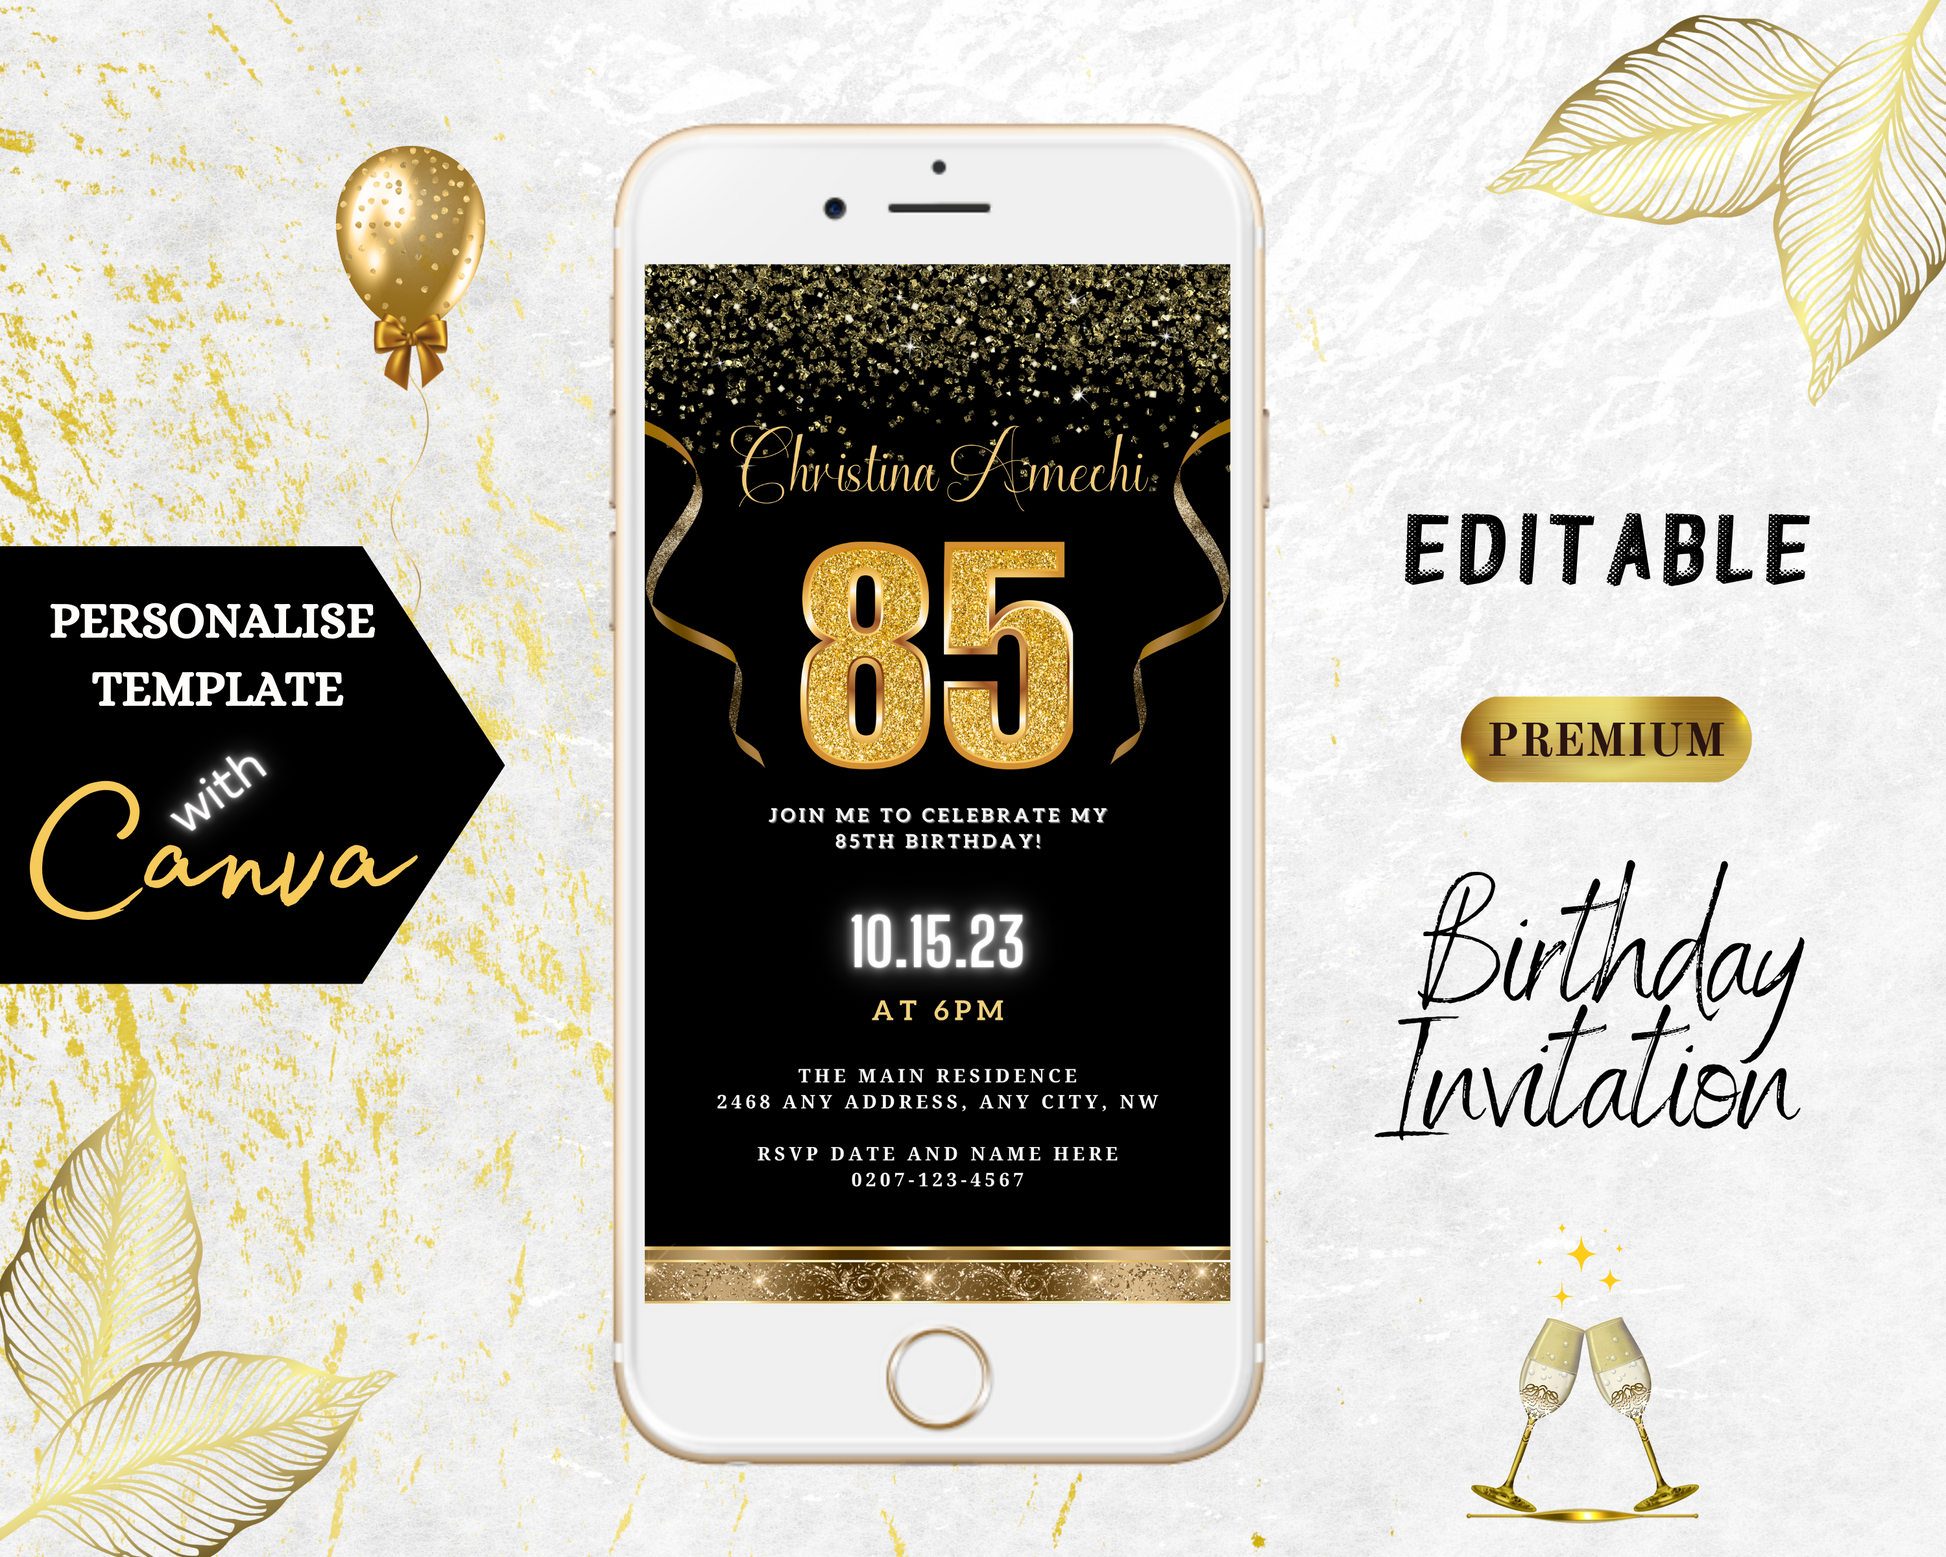 Black Gold Confetti 85th Birthday Evite displayed on a smartphone, featuring customizable gold text and celebratory balloons for a digital invitation template.